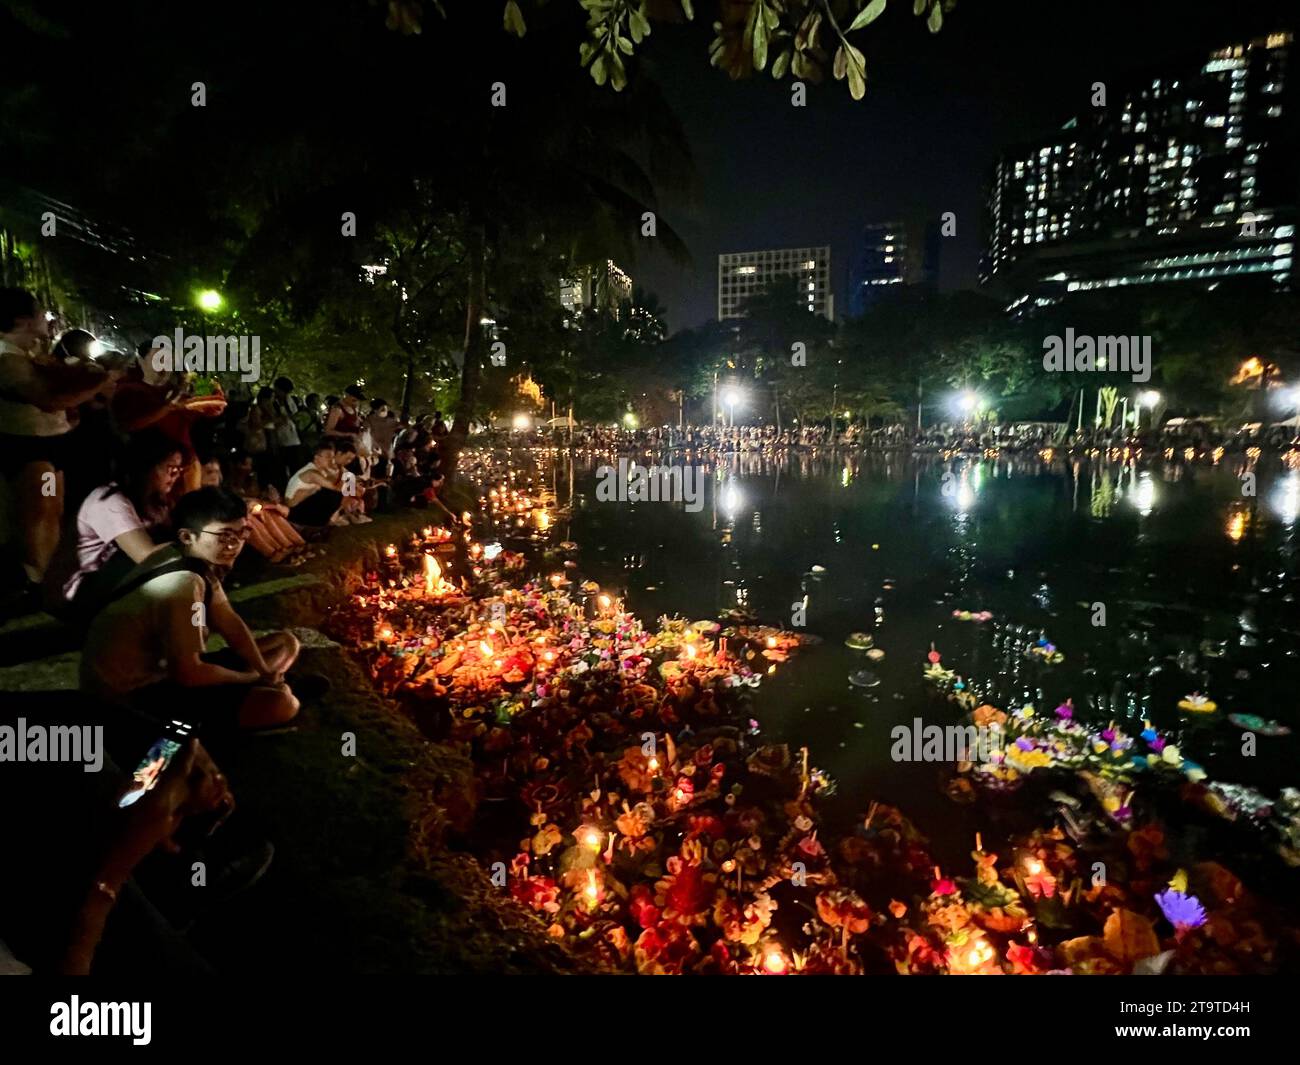 Bangkok, Thailand. 27th Nov, 2023. Krathongs float in a lake in Lumphini Park, one of Bangkok's largest parks. The small rafts are made of banana trees or expanded polystyrene and are decorated with flowers, incense sticks and candles. Thailand always celebrates the Loi Krathong festival of lights on the day of the full moon in the twelfth month of the traditional calendar. The small rafts are lowered into the water in rivers or lakes to pay homage to the Hindu water goddess Mae Phra Khongkha. Credit: Carola Frentzen/dpa/Alamy Live News Stock Photo